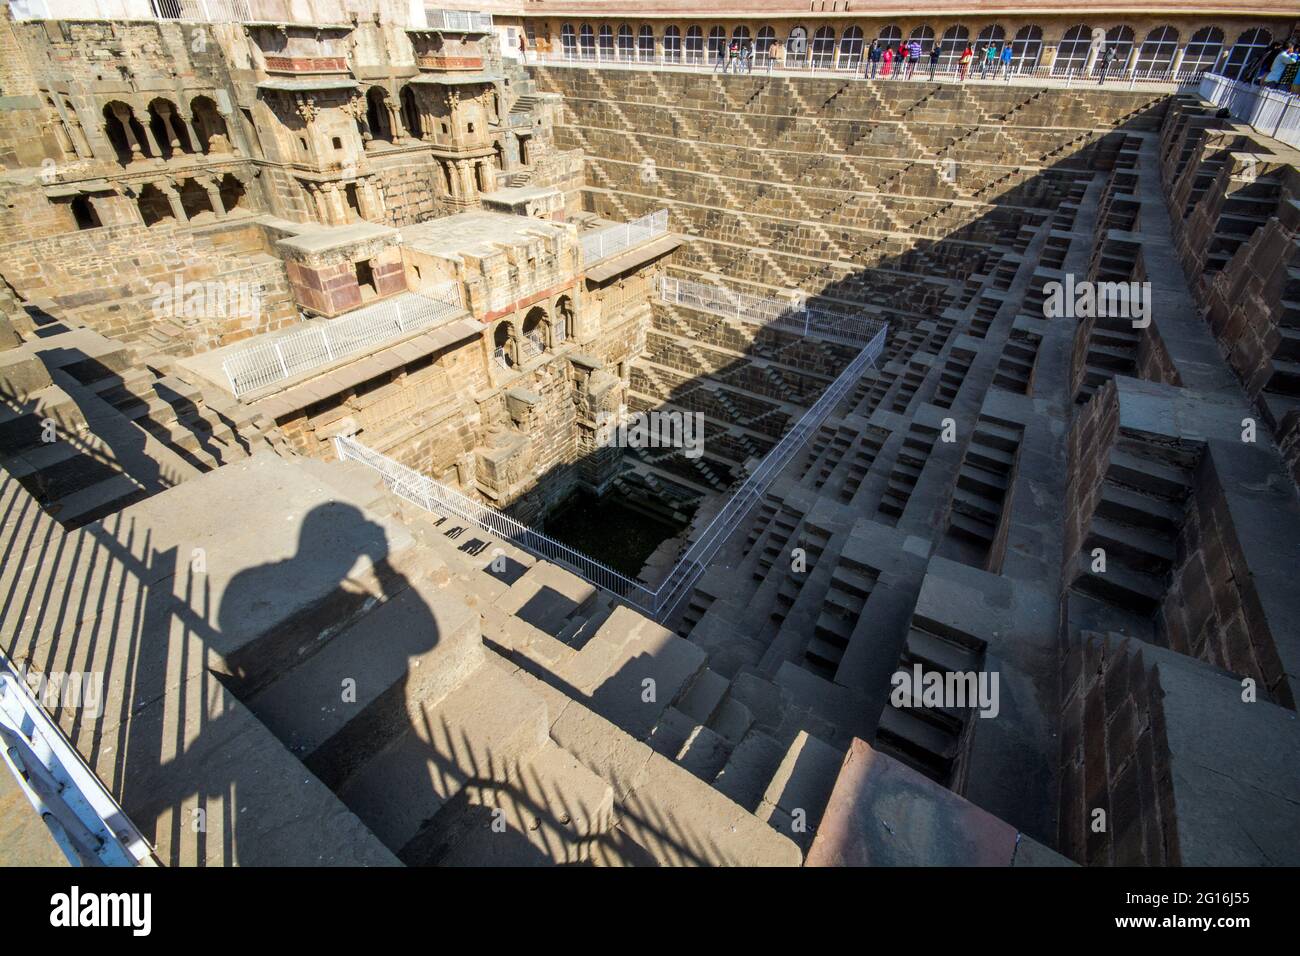 Chand Baori at Abhaneri Village in Rajasthan is the most photogenic step well of India.Yes, it is older than Taj Mahal, Khajuraho Temples. Stock Photo